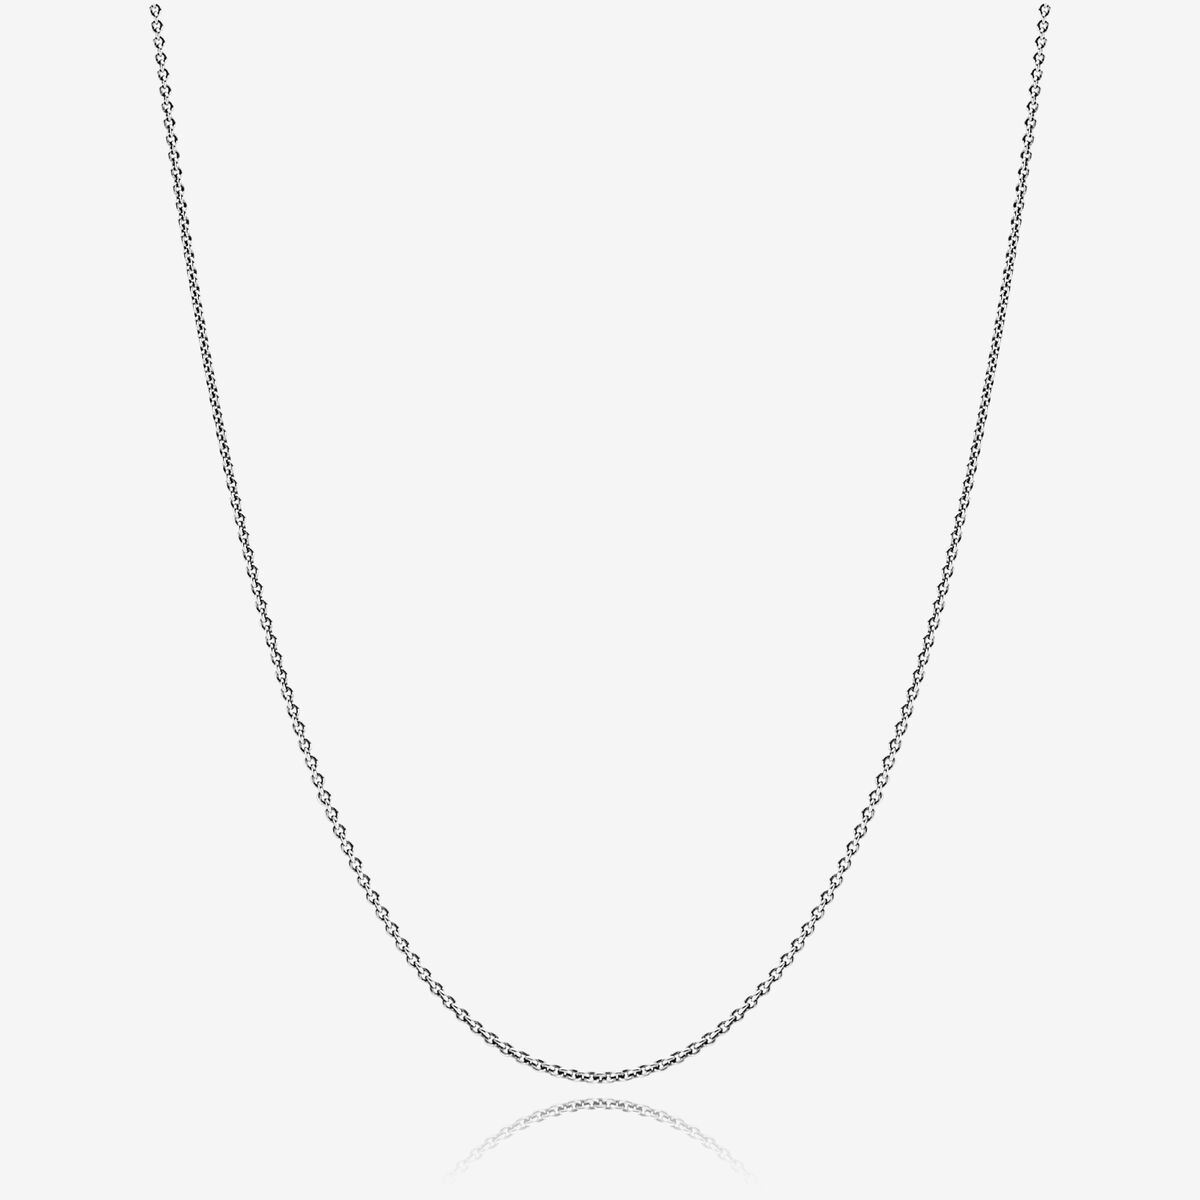 Adjustable Sterling Silver Chain Necklace | Sterling silver | Pandora ...